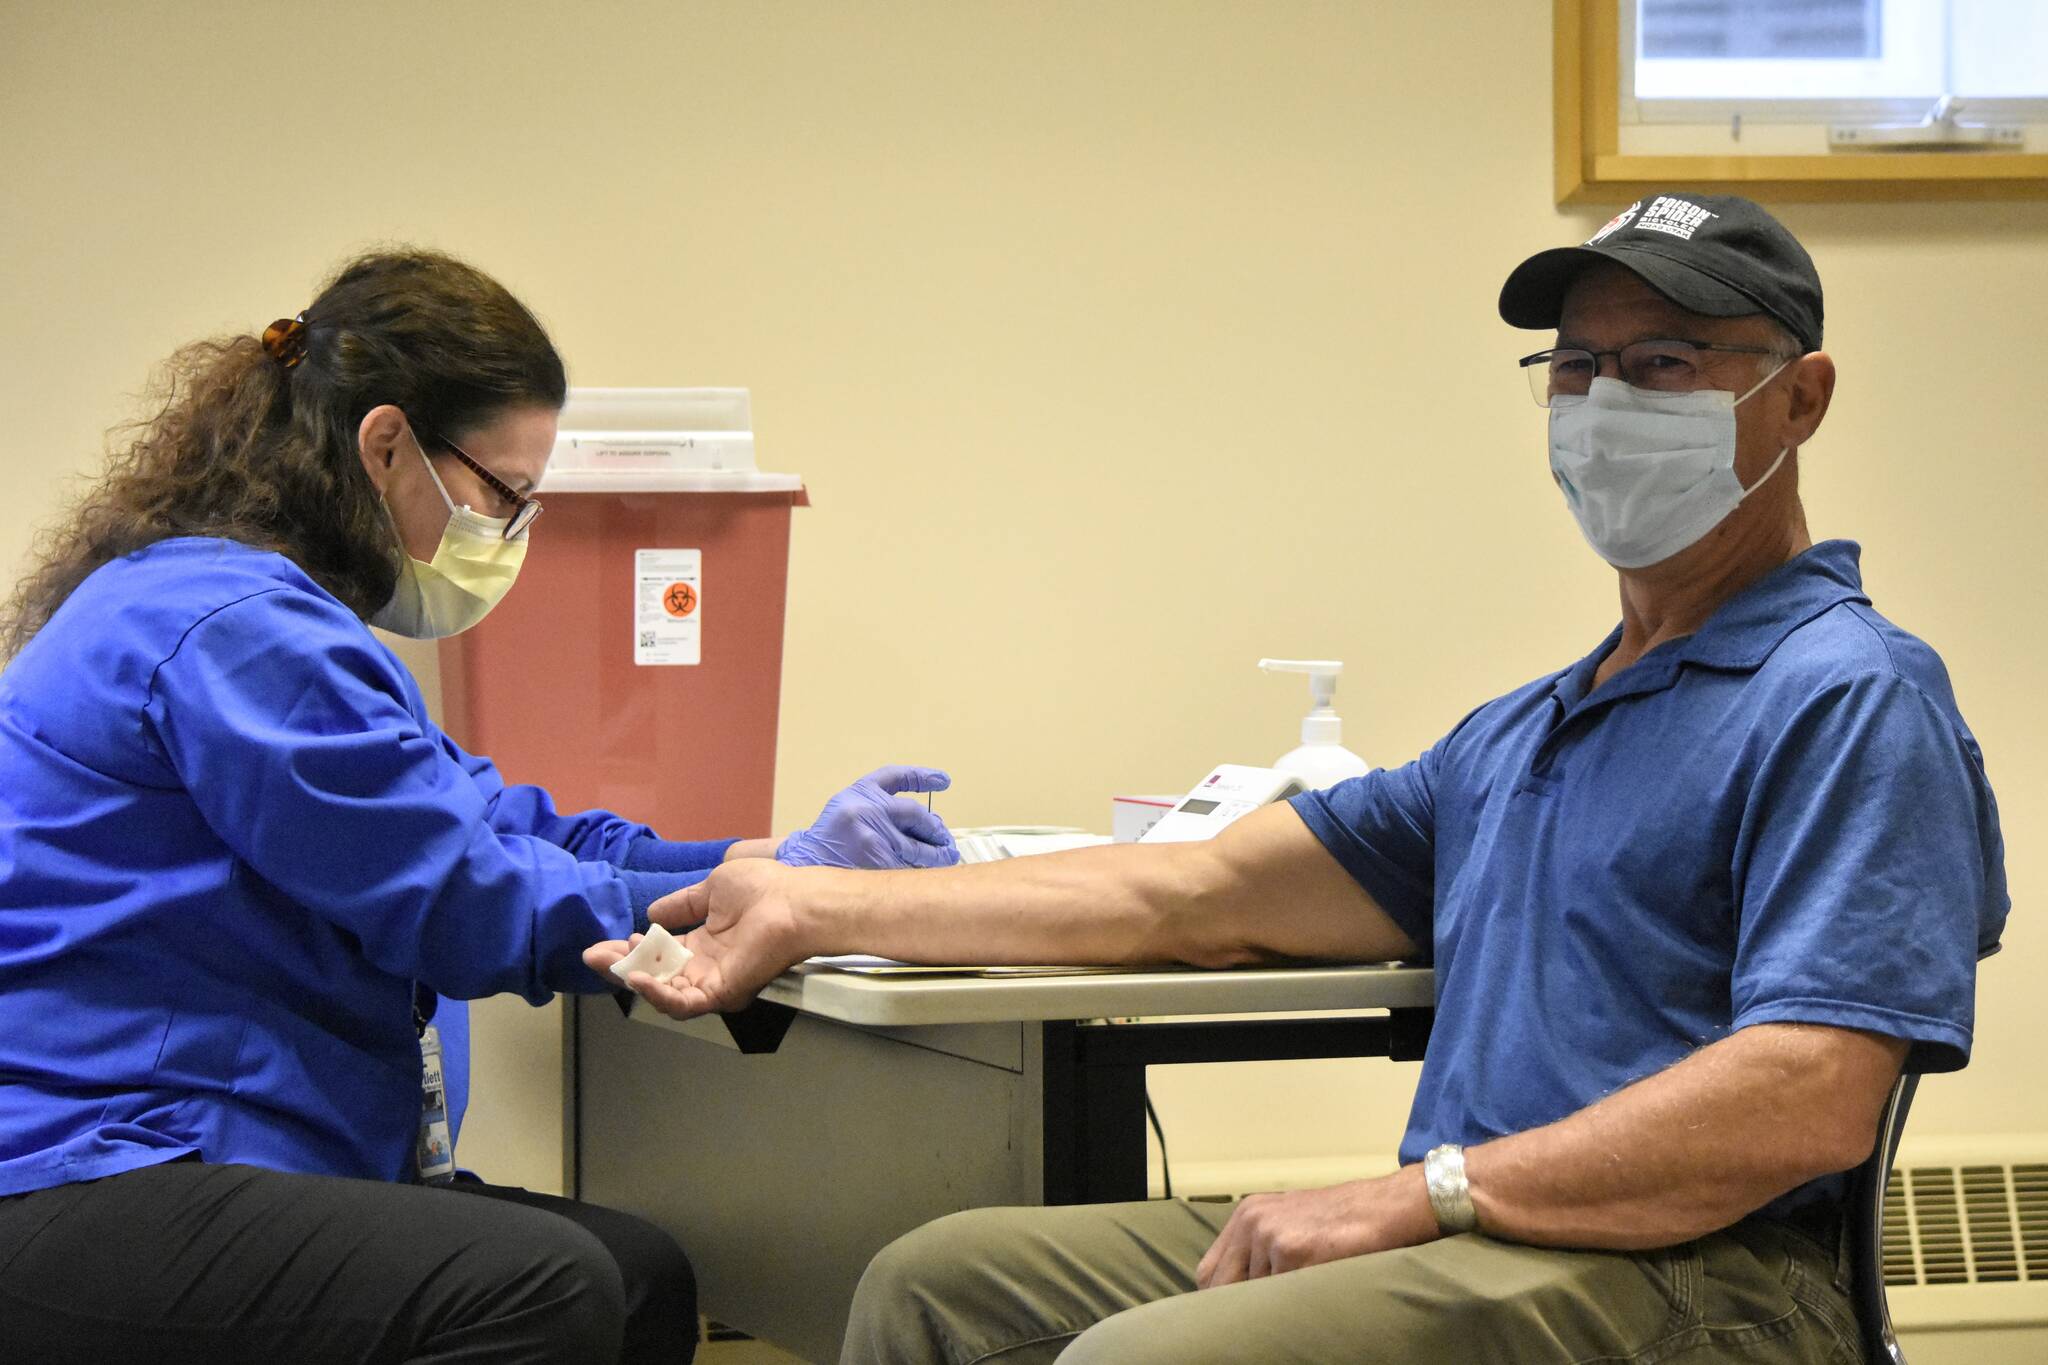 Fritz Moser, 63, waits while registered nurse Lori Higgins test his blood sample for glucose and cholesterol levels at a free screening clinic on Saturday, Nov. 6, 2021, at Bartlett Regional Hospital. The hospital used to hold regular health clinics to stress the importance of preventive health care but those had to close with the COVID-19 pandemic. (Peter Segall / Juneau Empire)